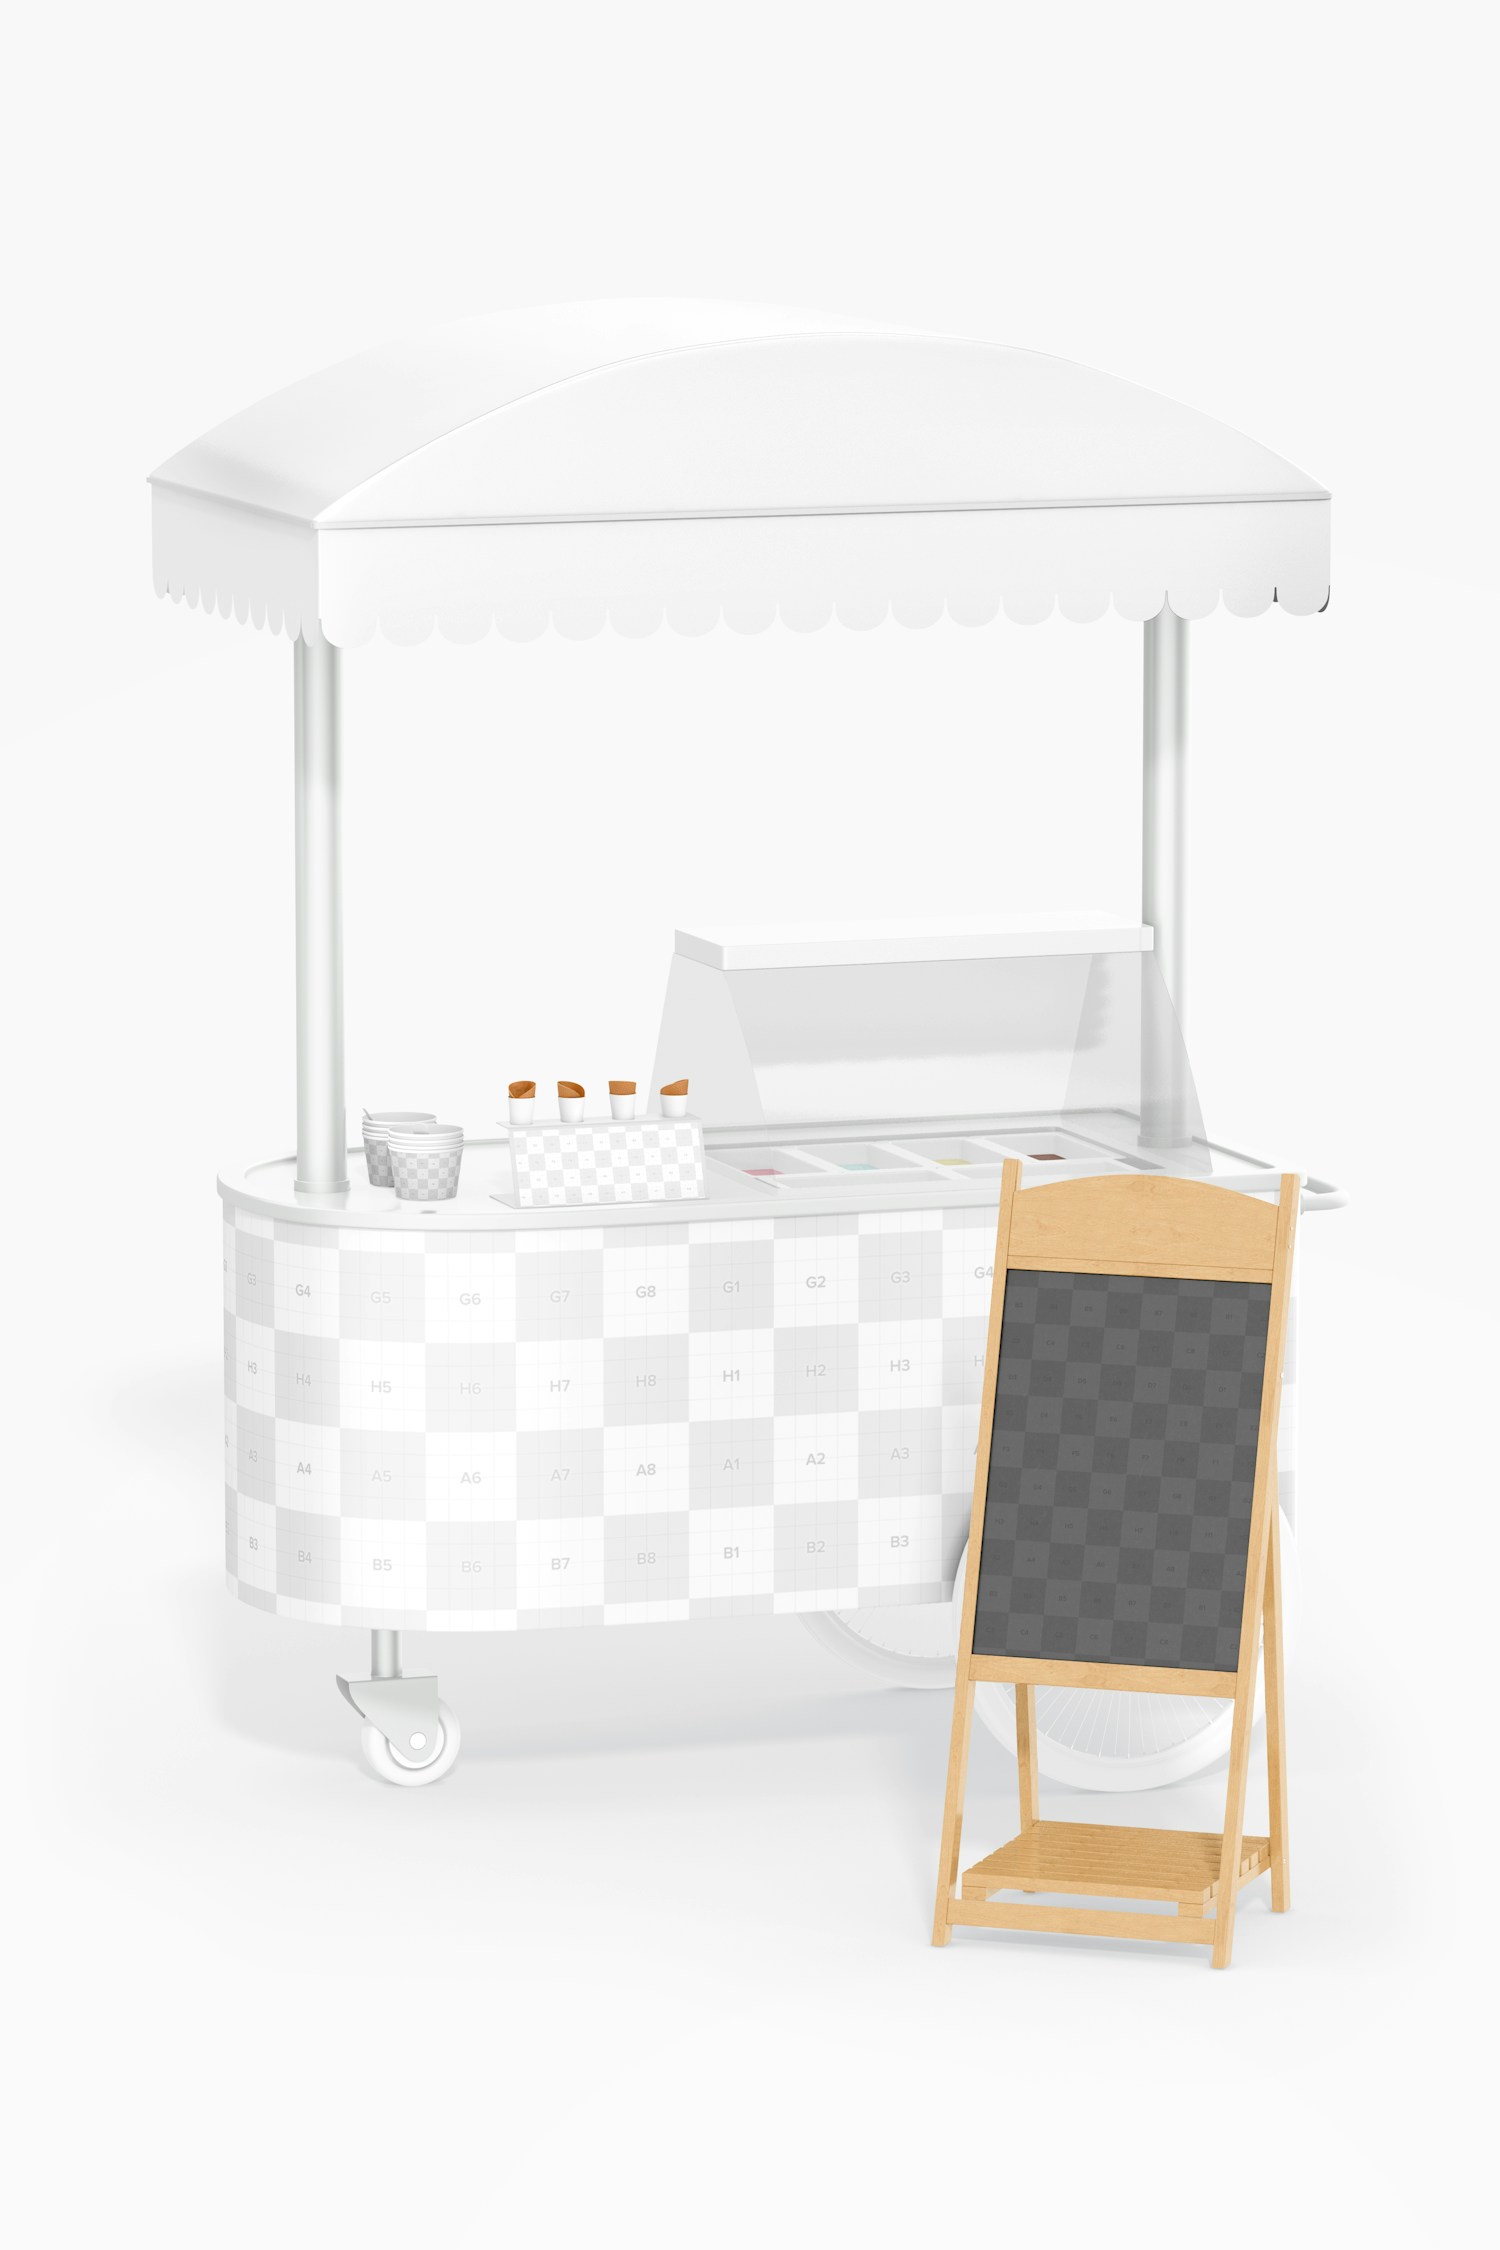 Ice Cream Cart Mockup, with Sign